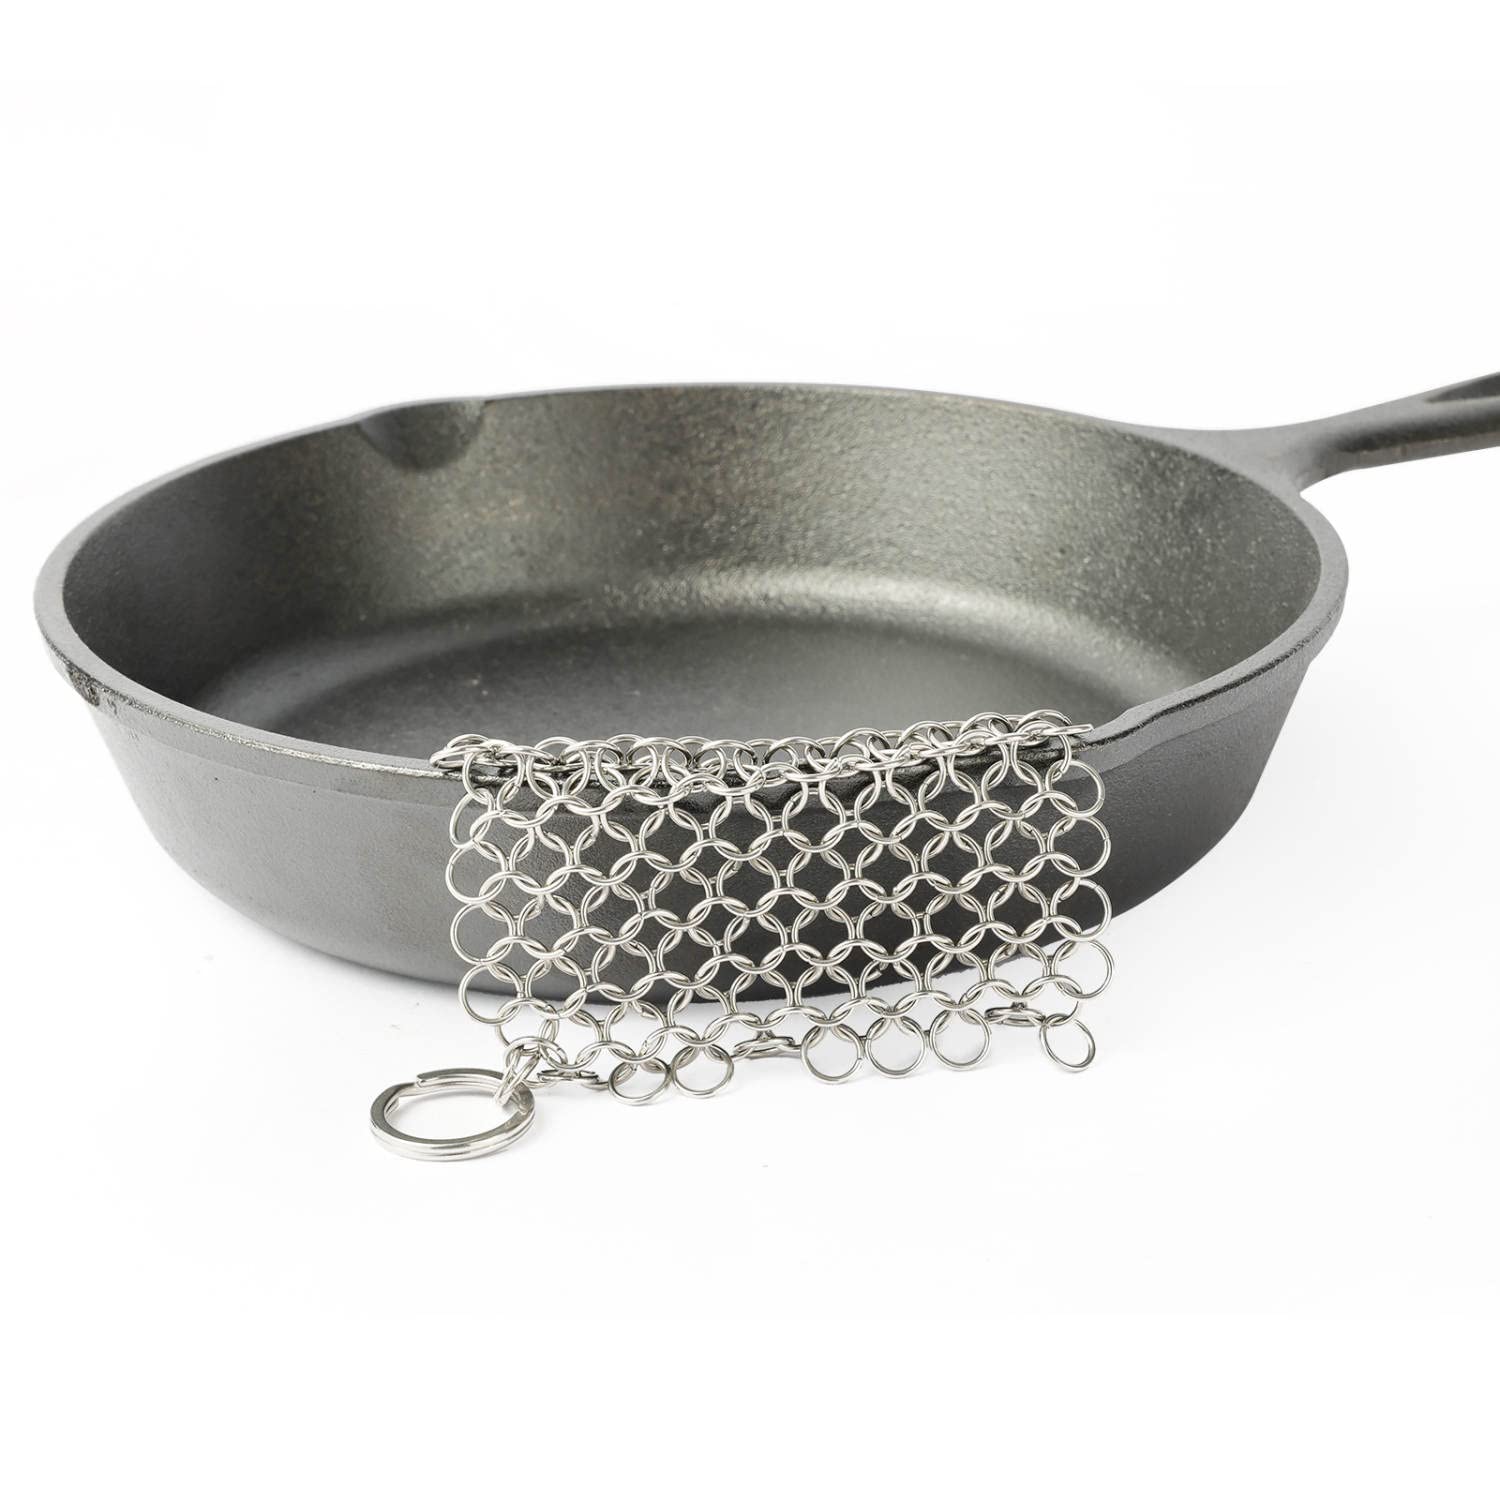 DUIJINYU Stainless Steel Chainmail Scrubber for Cast Iron-4x4 Skillet  Cleaner, Removes Stuck Food on Iron Skillets, Pre-Seasoned Cookware Safe  for Waffle Irons, Dutch Ovens, and Glassware - 1 Pack 4x4